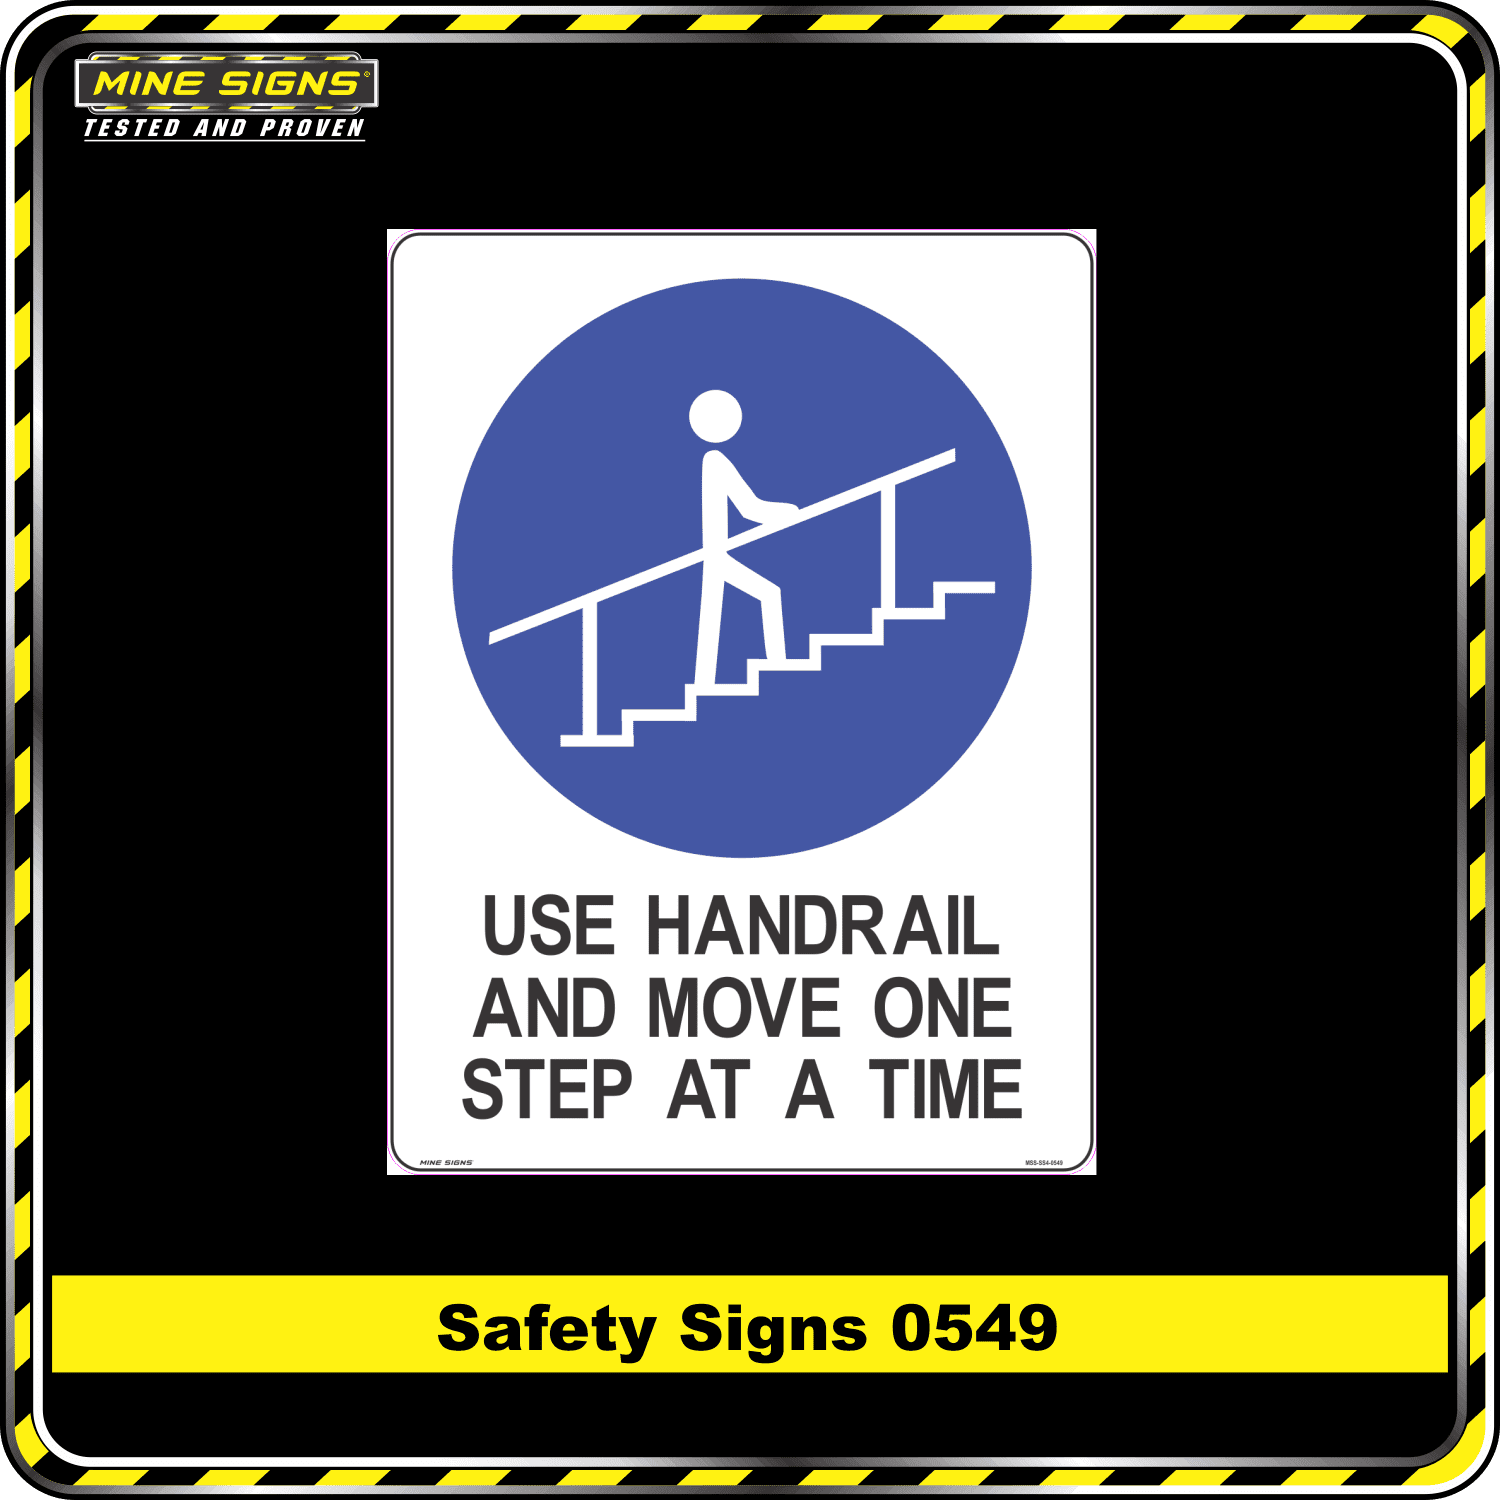 use handrail and move one step at a time